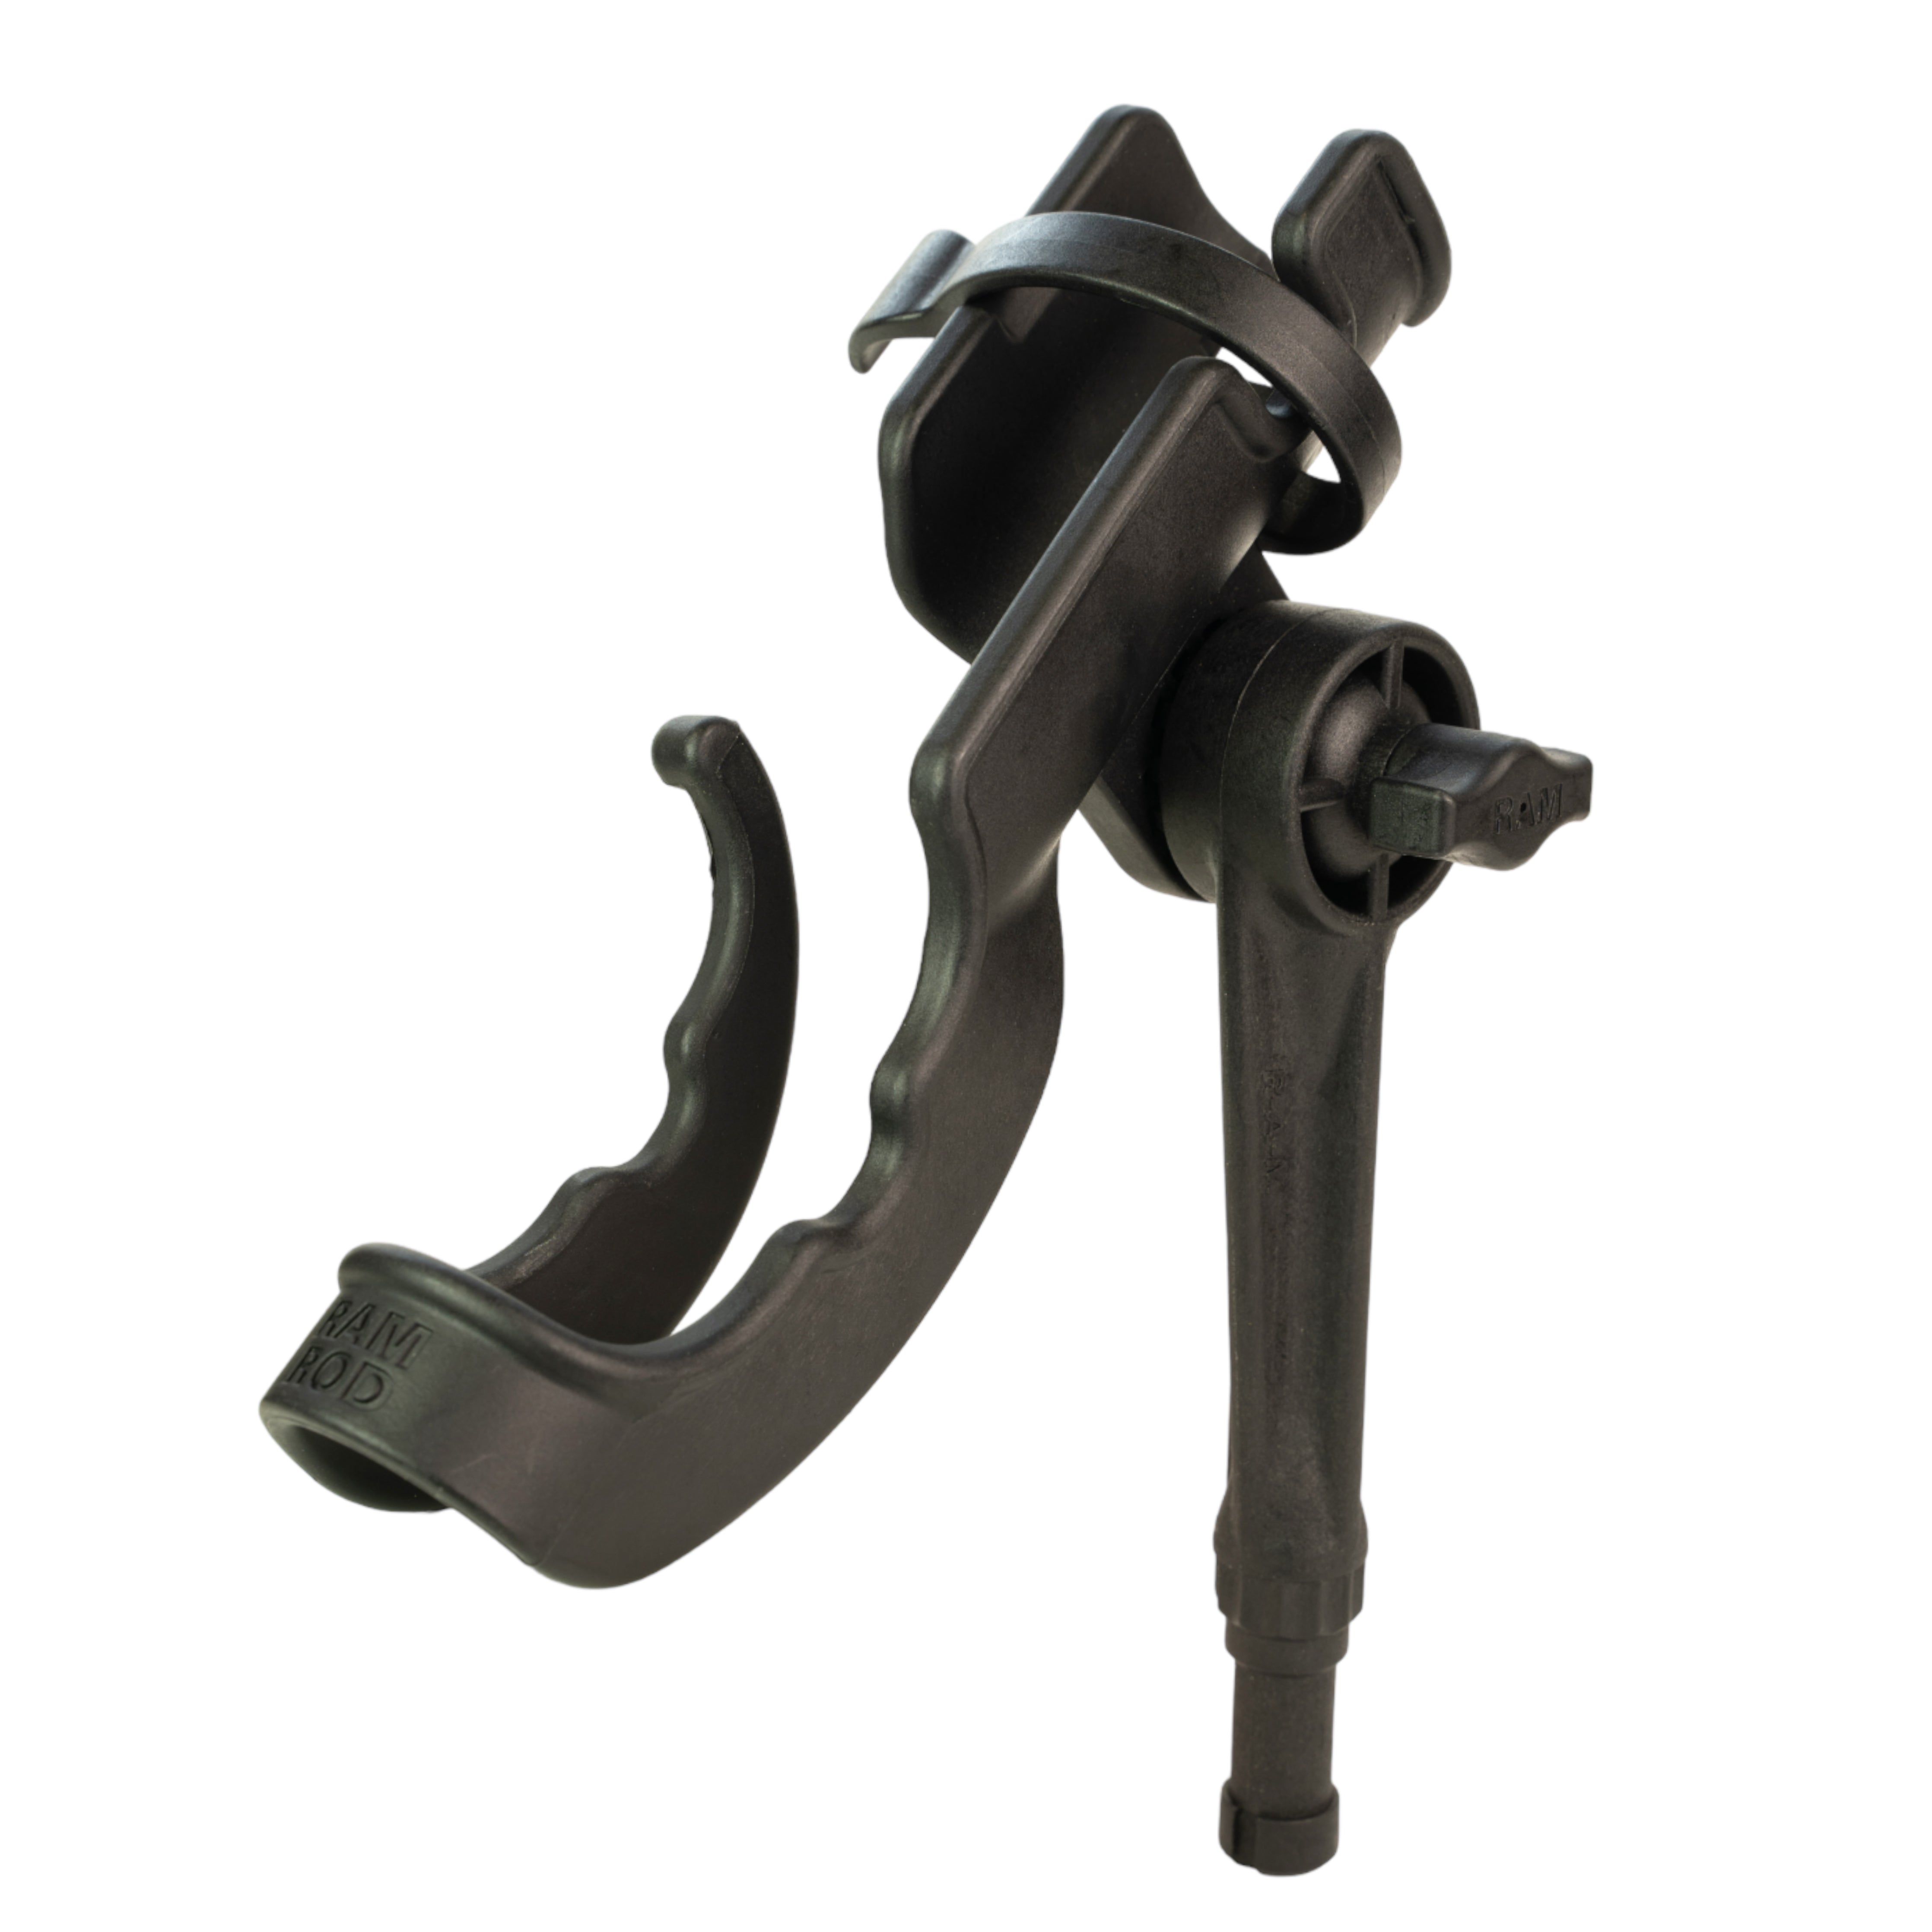 Neptune Tackle Double Prong Fishing Rod Holder Dprh for sale online